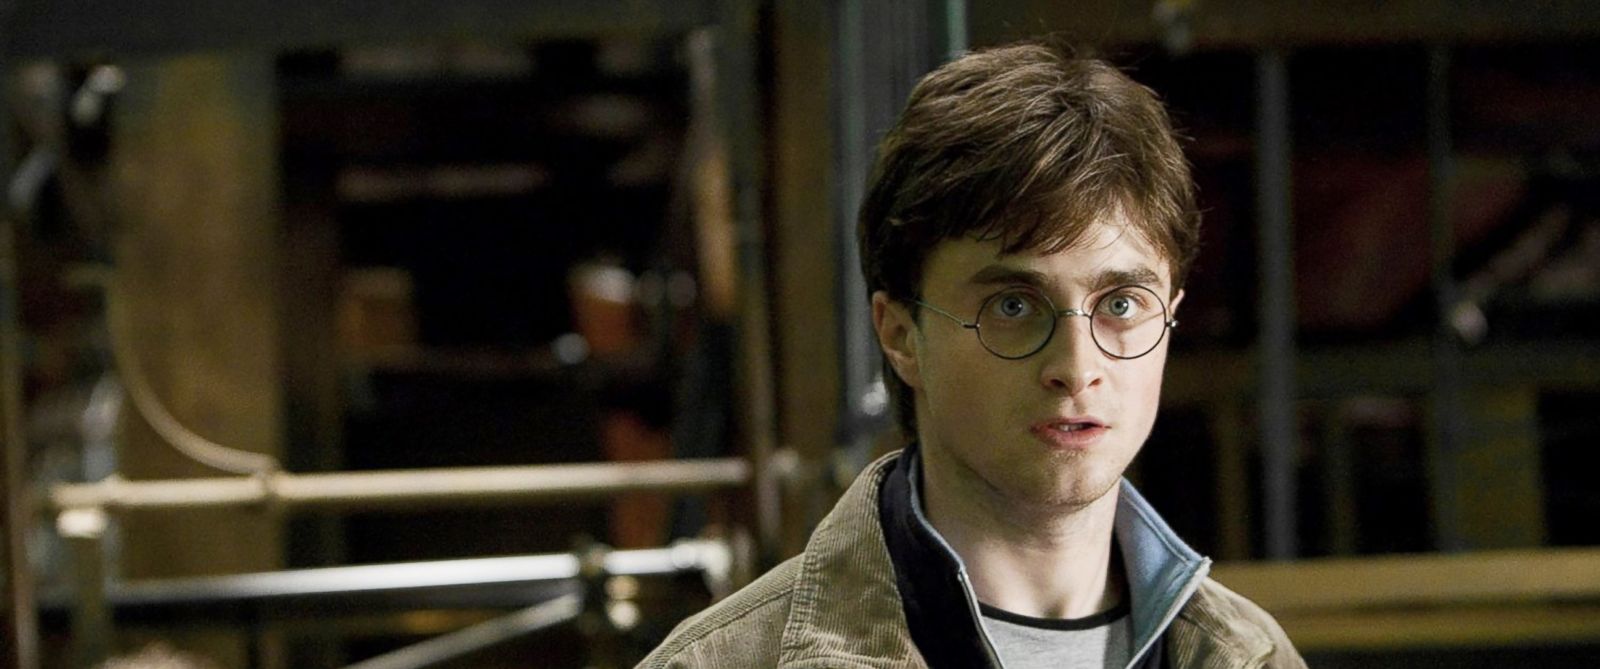 ☀ How old was radcliffe in deathly hallows